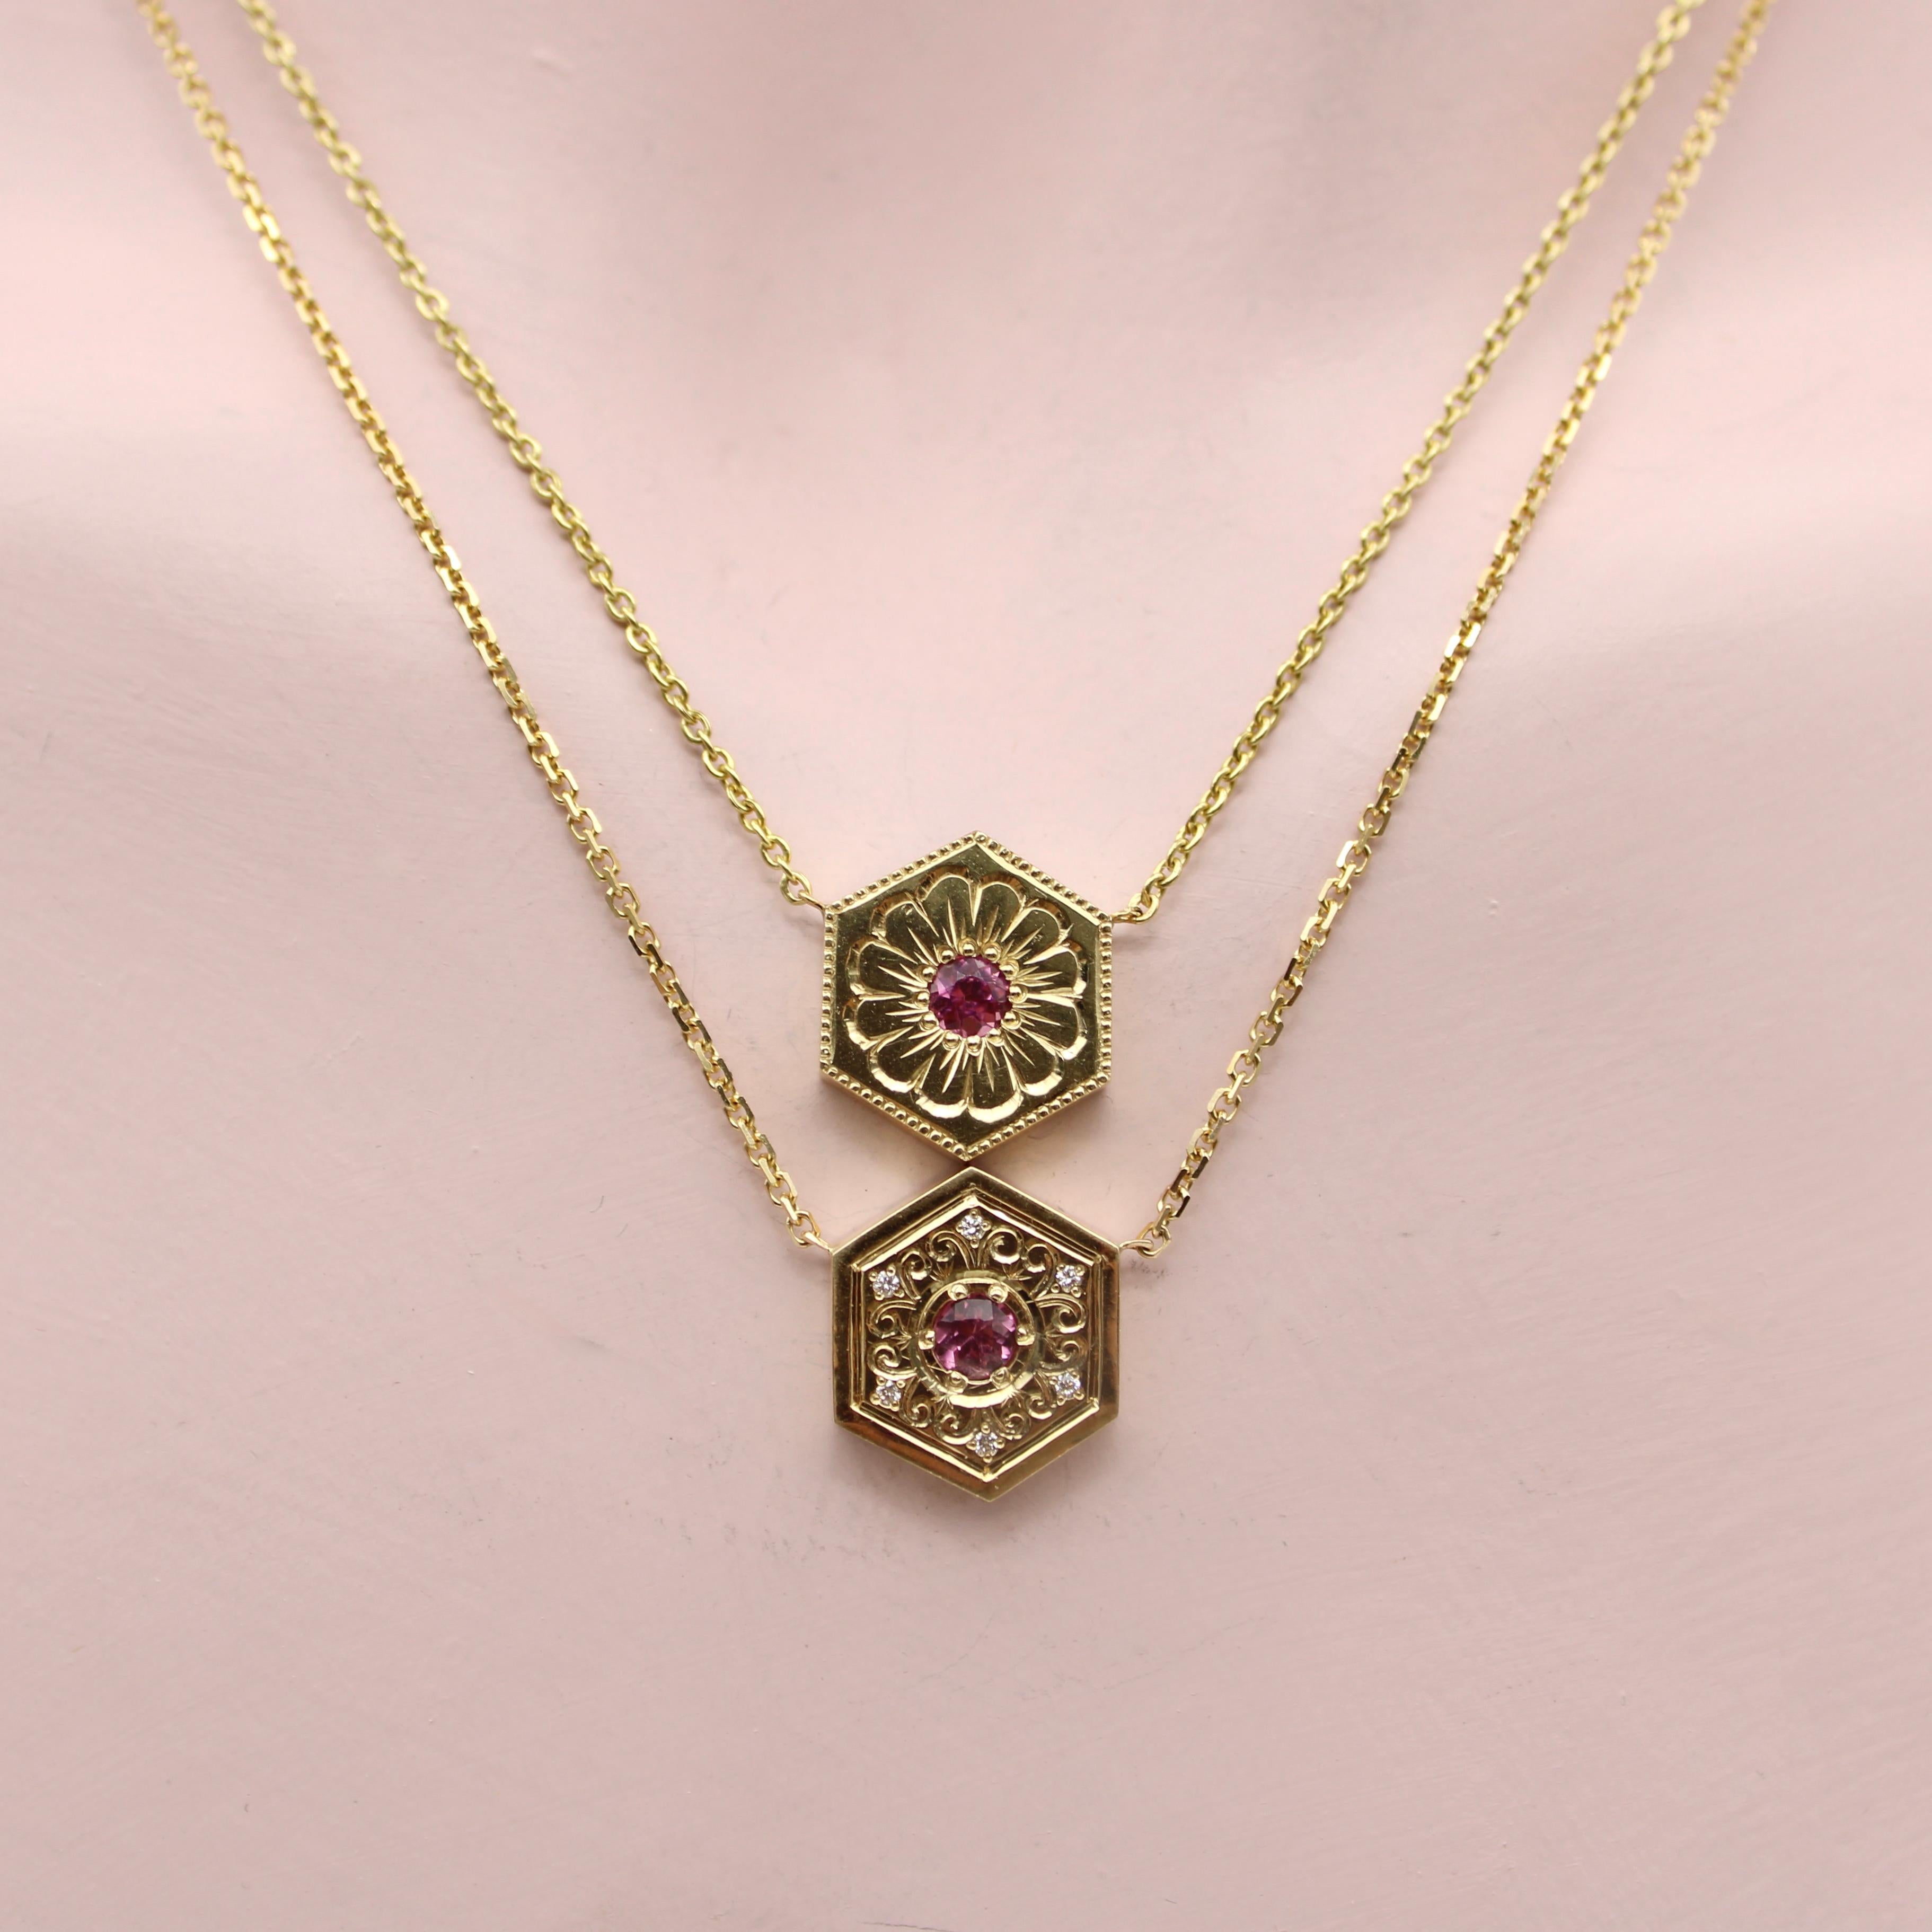 Women's or Men's 14k Gold Mandala Medallion Necklace with Pink Tourmaline For Sale